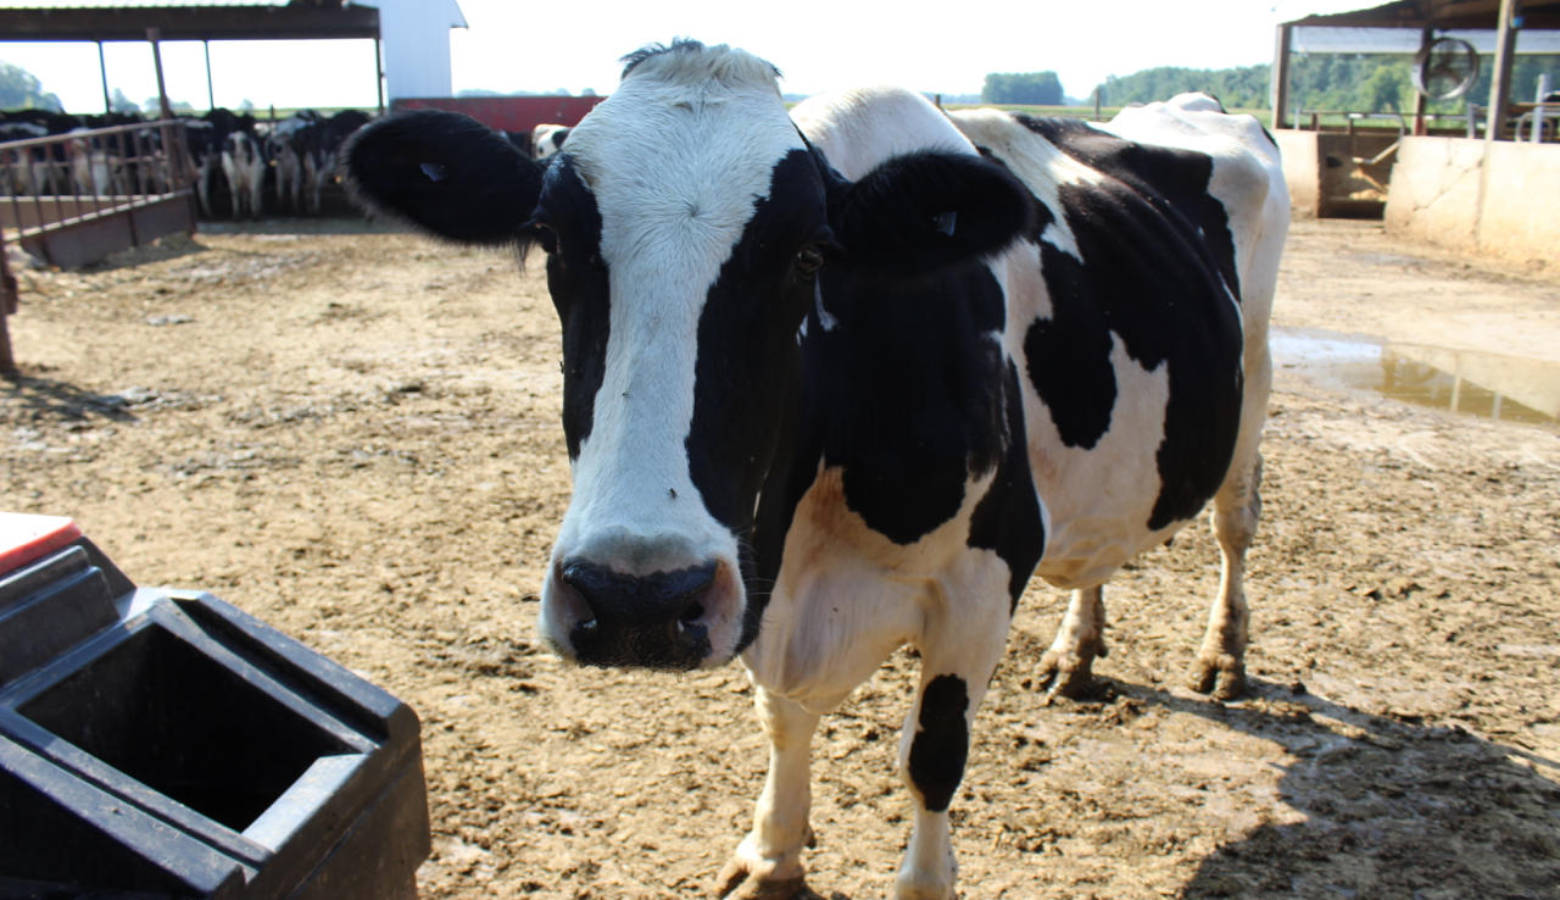 A dairy cow in LaPorte County. (FILE PHOTO: Annie Ropeik/IPB News)